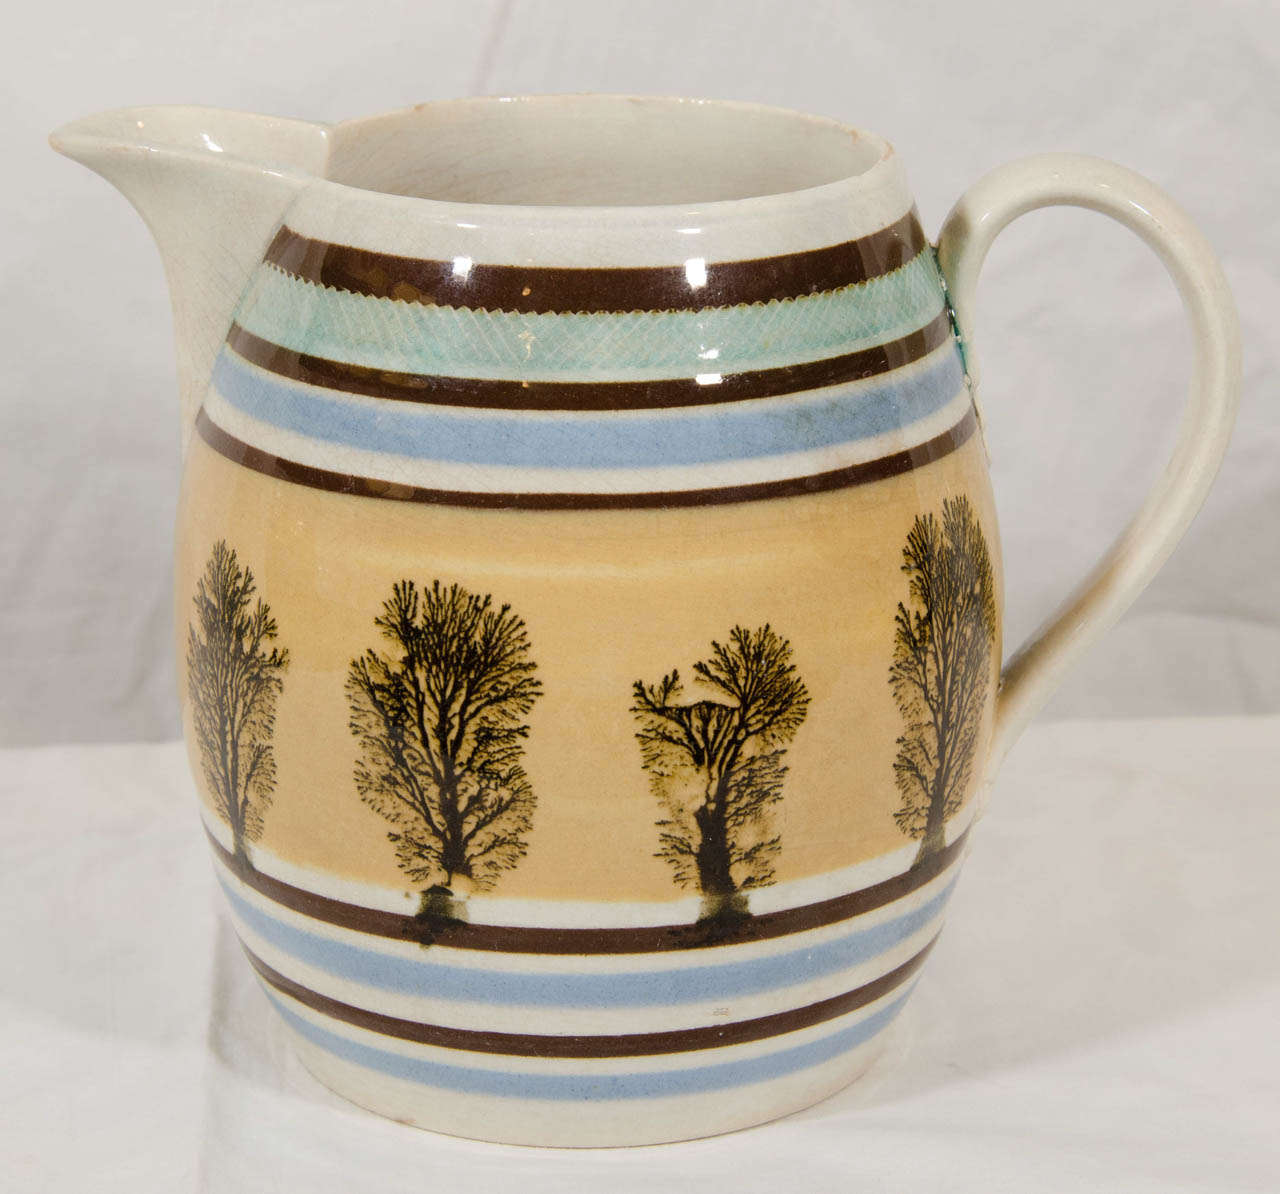 A large Mocha ware jug  decorated with machine turned bands of slip in light tones of blue and green and thinner bands of dark brown framing a single broad band of beige which has within a dendritic design resembling a row of trees at the edge of a